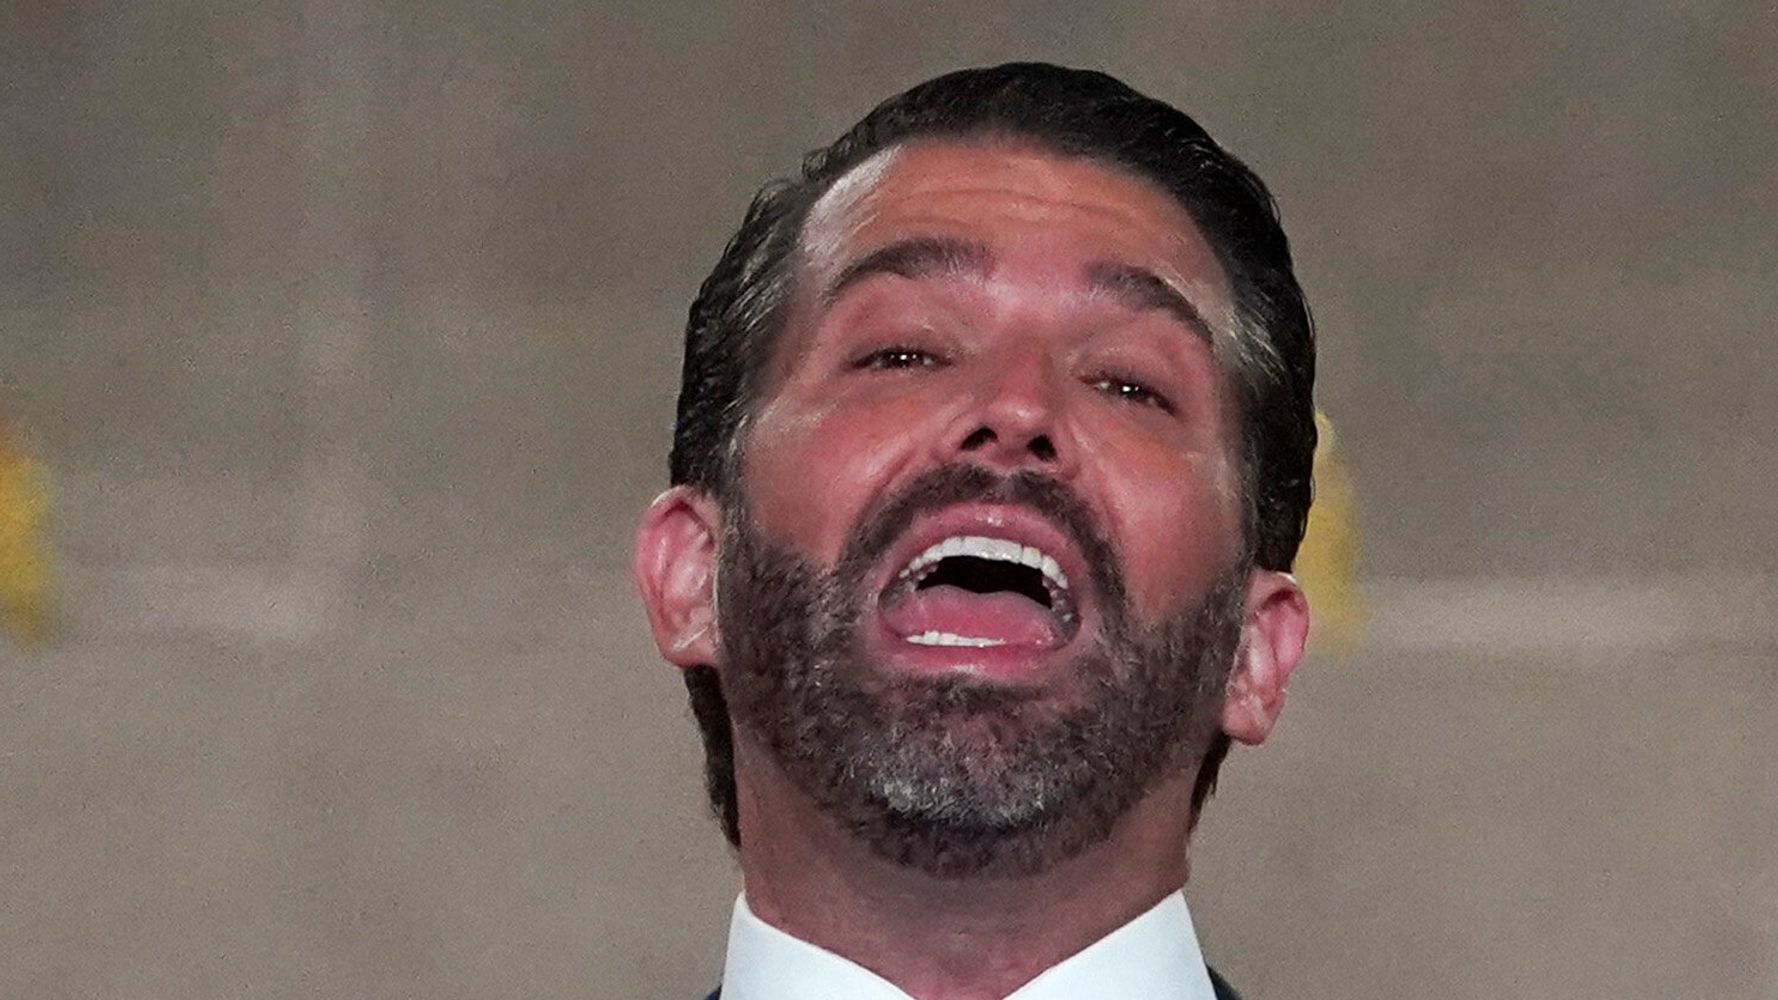 RNC na berig word gedaal $300,000 To Buy Donald Trump Jr.'s Latest Book